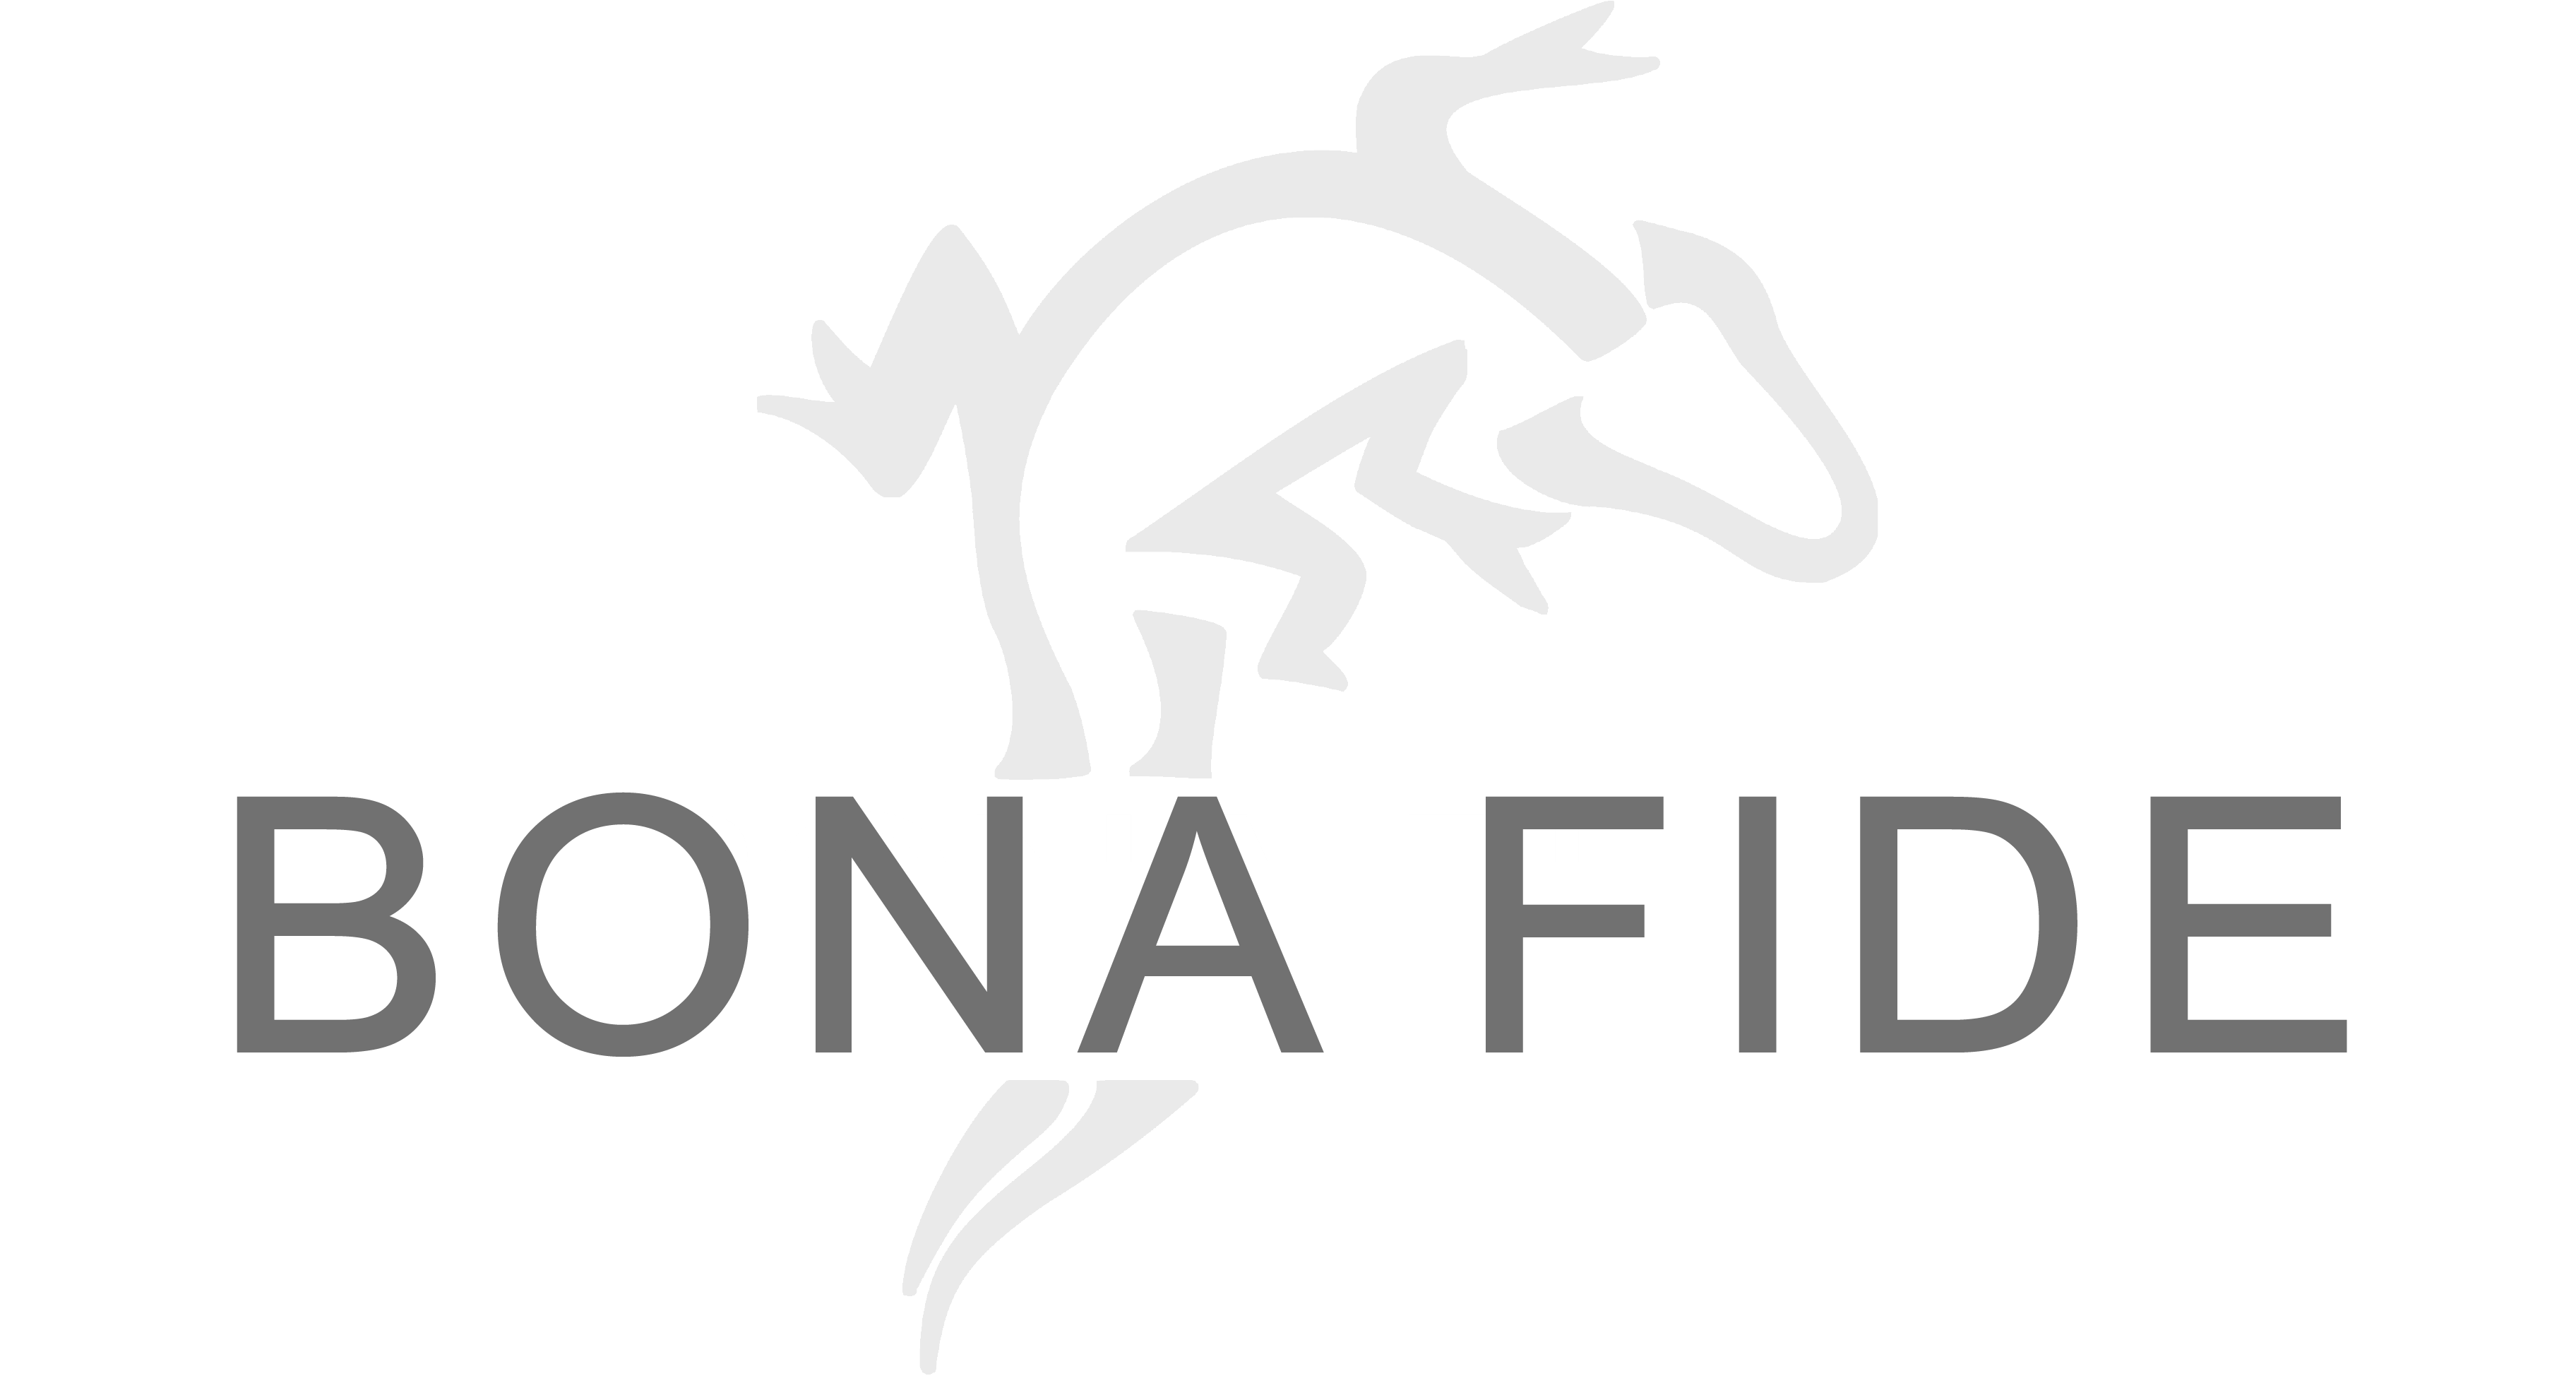 Bona Fide Corporation – Manufacturing High Quality Custom Cabinetry